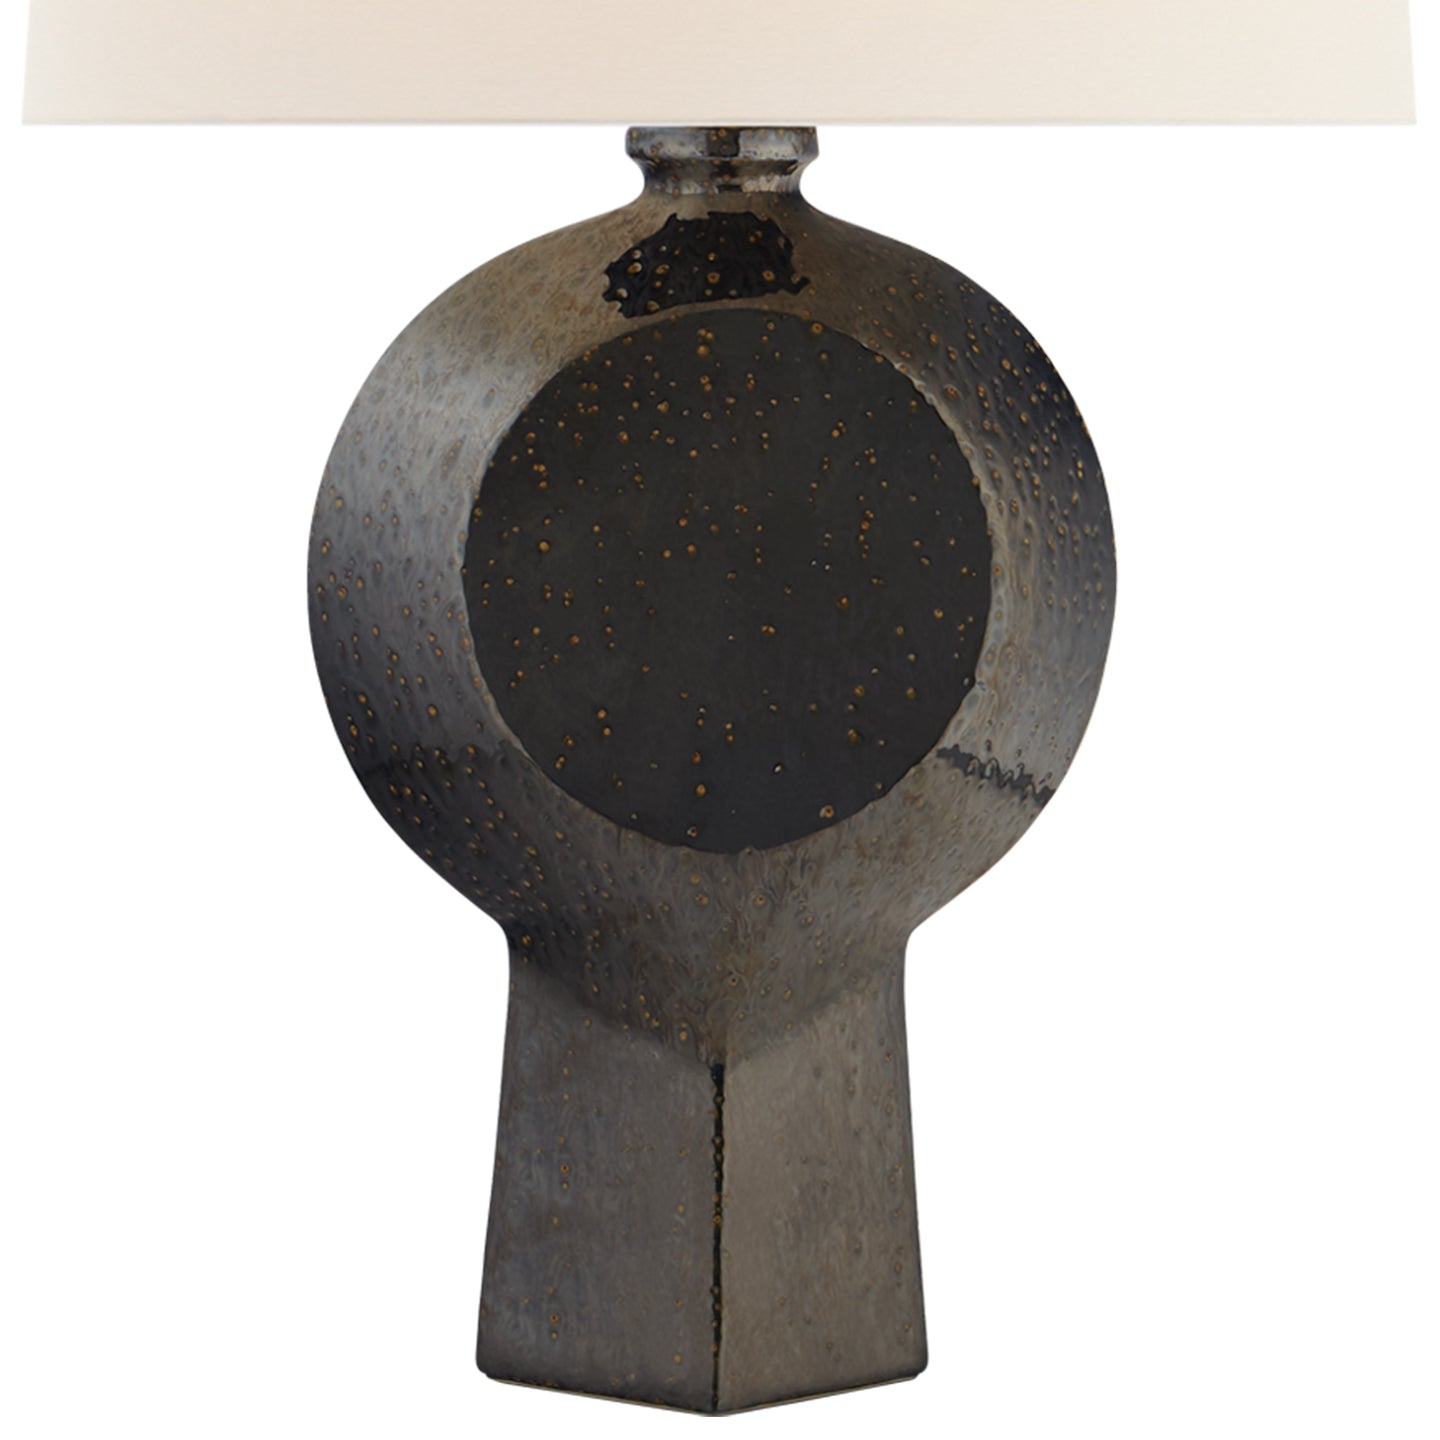 This table lamp can be a perfect addition that complements any aesthetic. Amethyst Home provides interior design services, furniture, rugs, and lighting in the Omaha metro area.